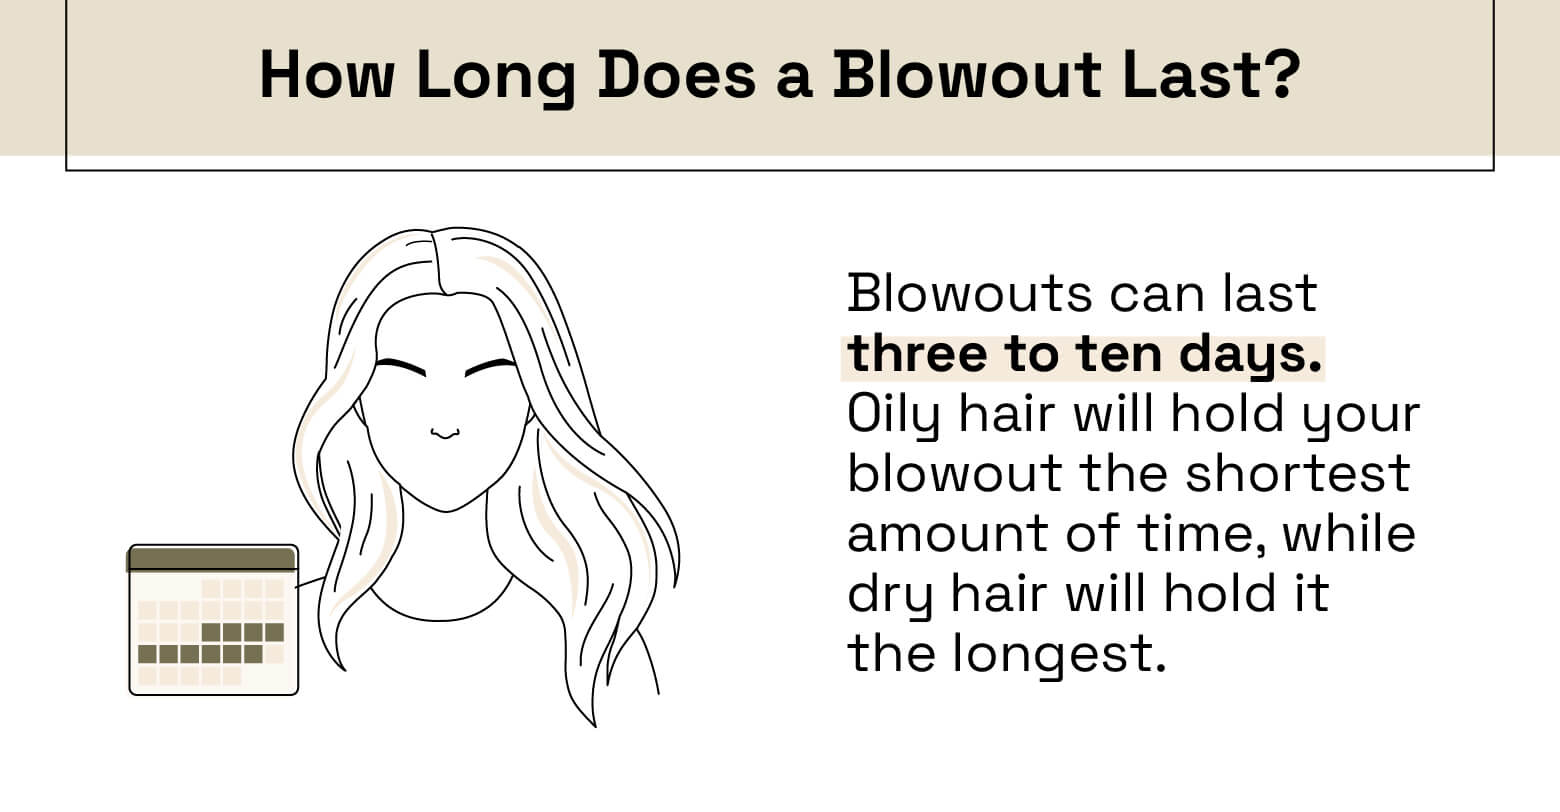 how long does a blowout last